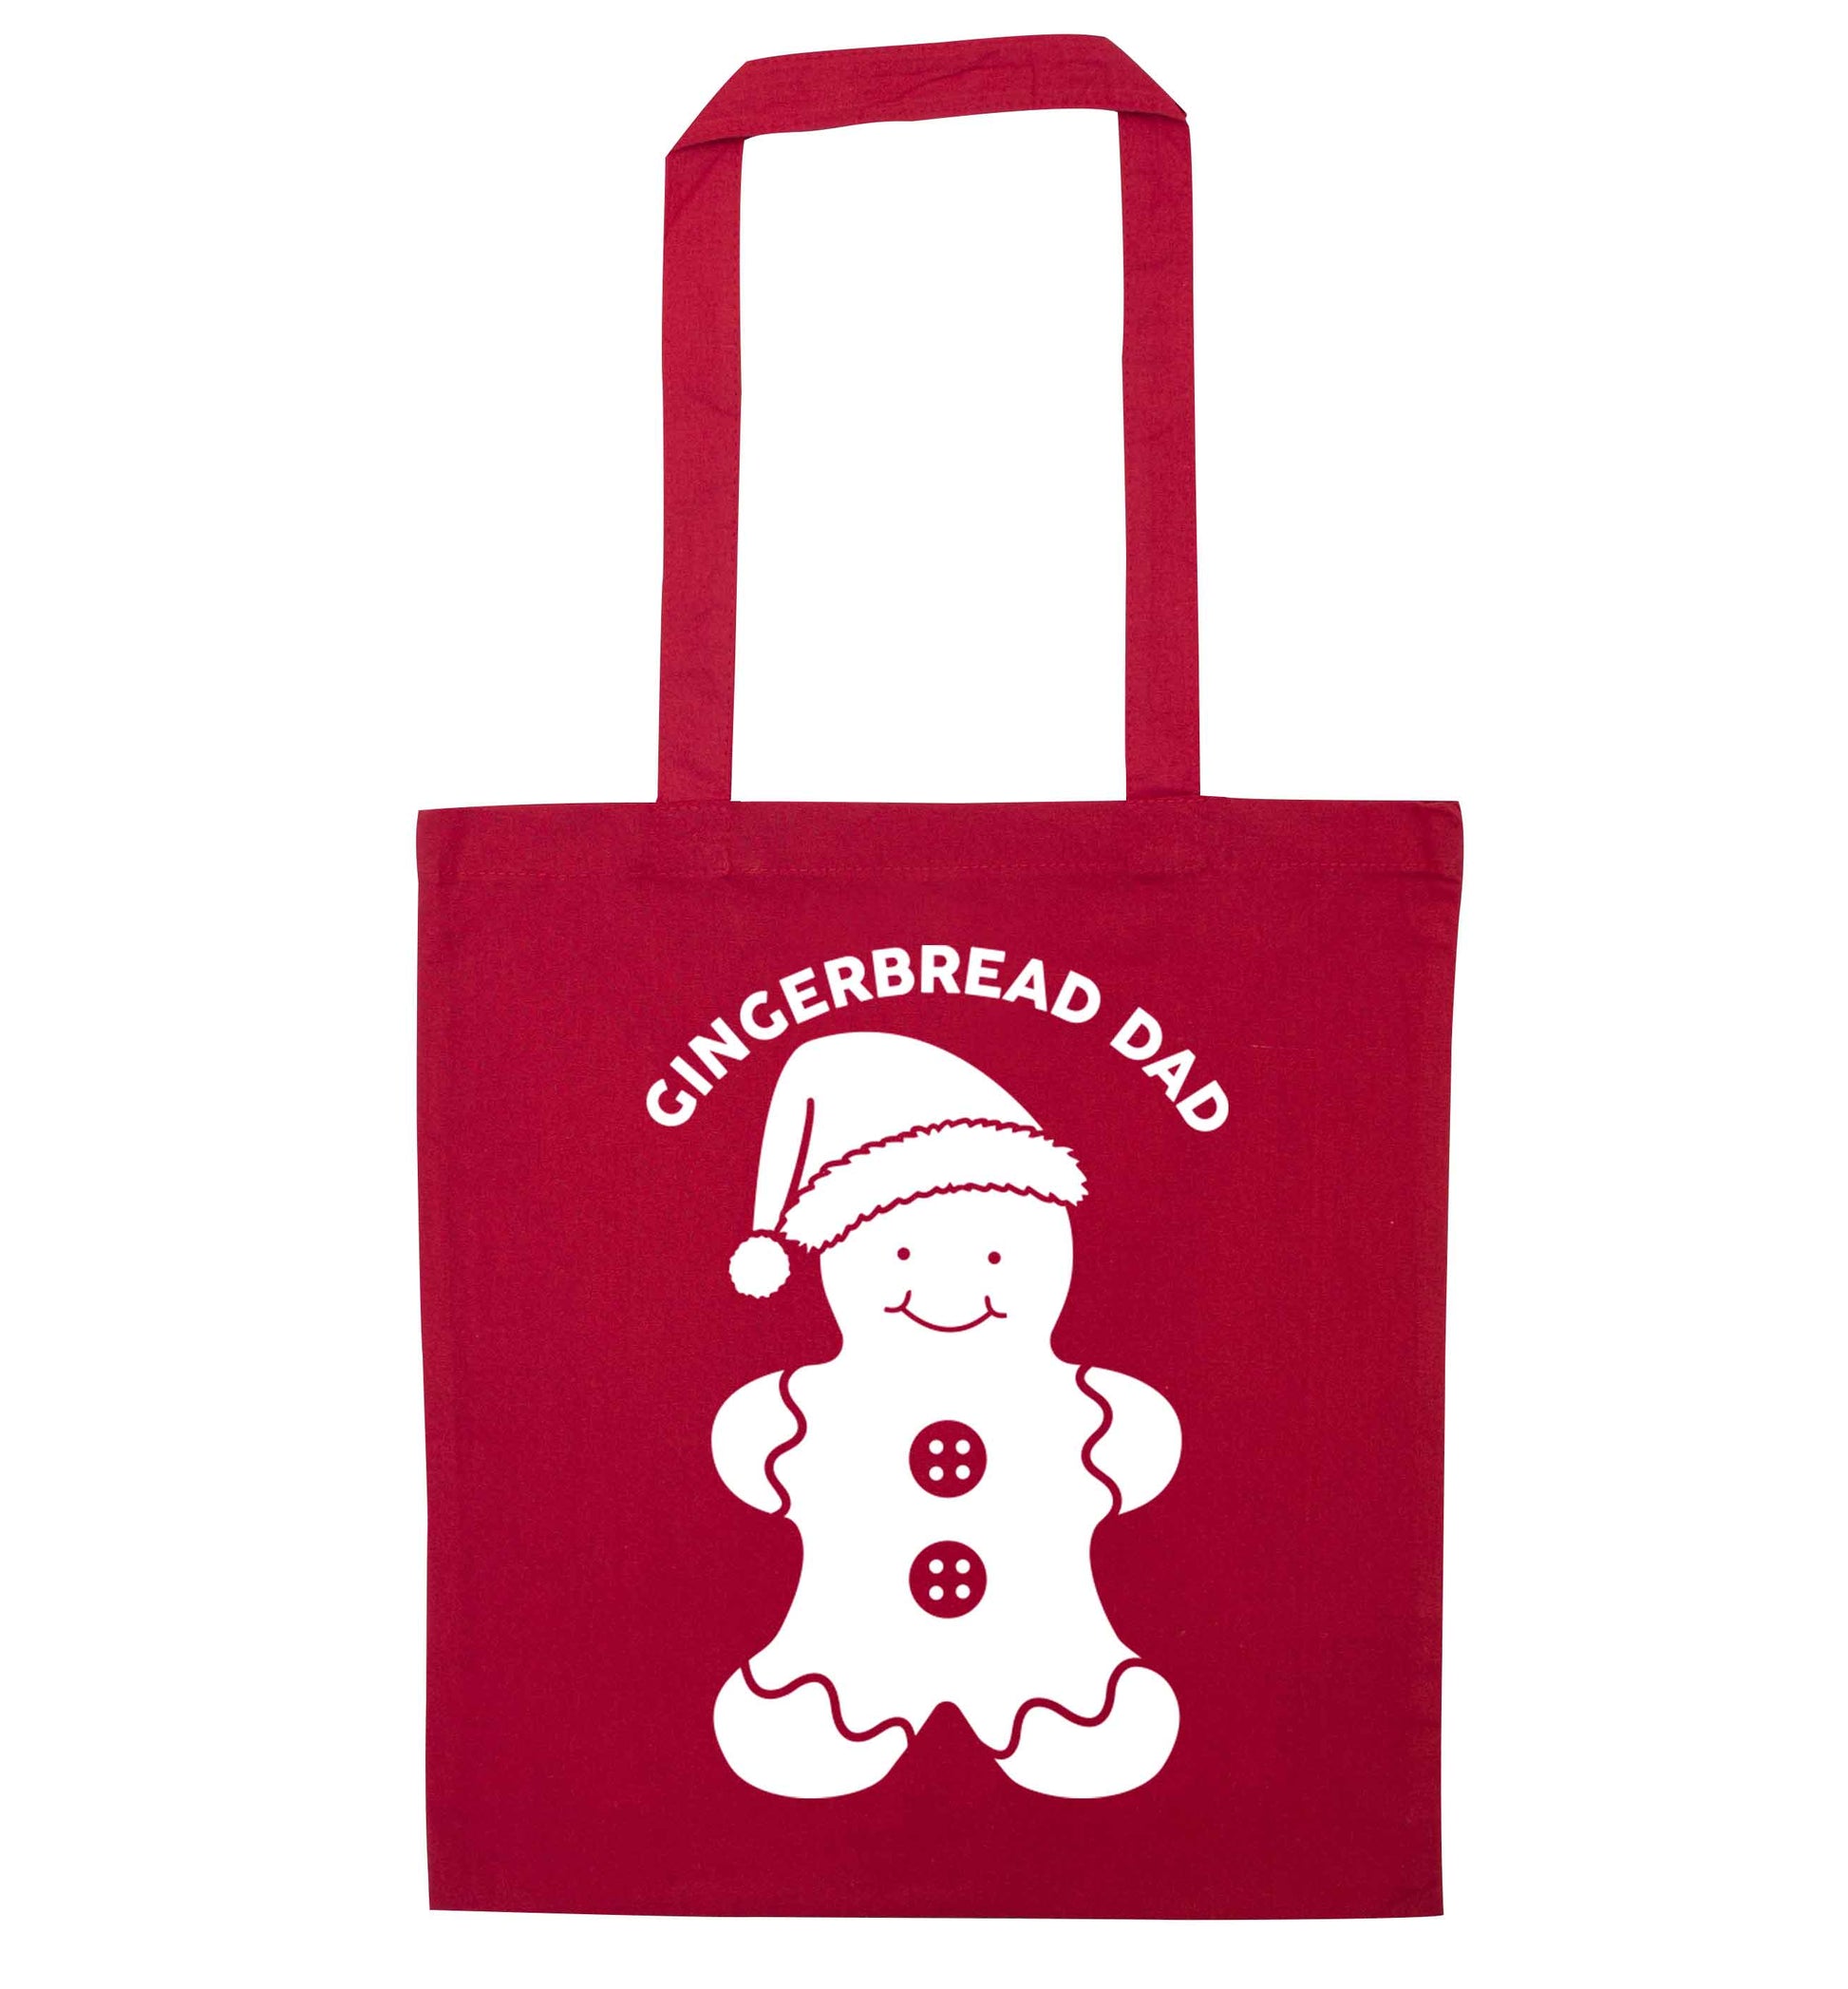 Merry Christmas red tote bag